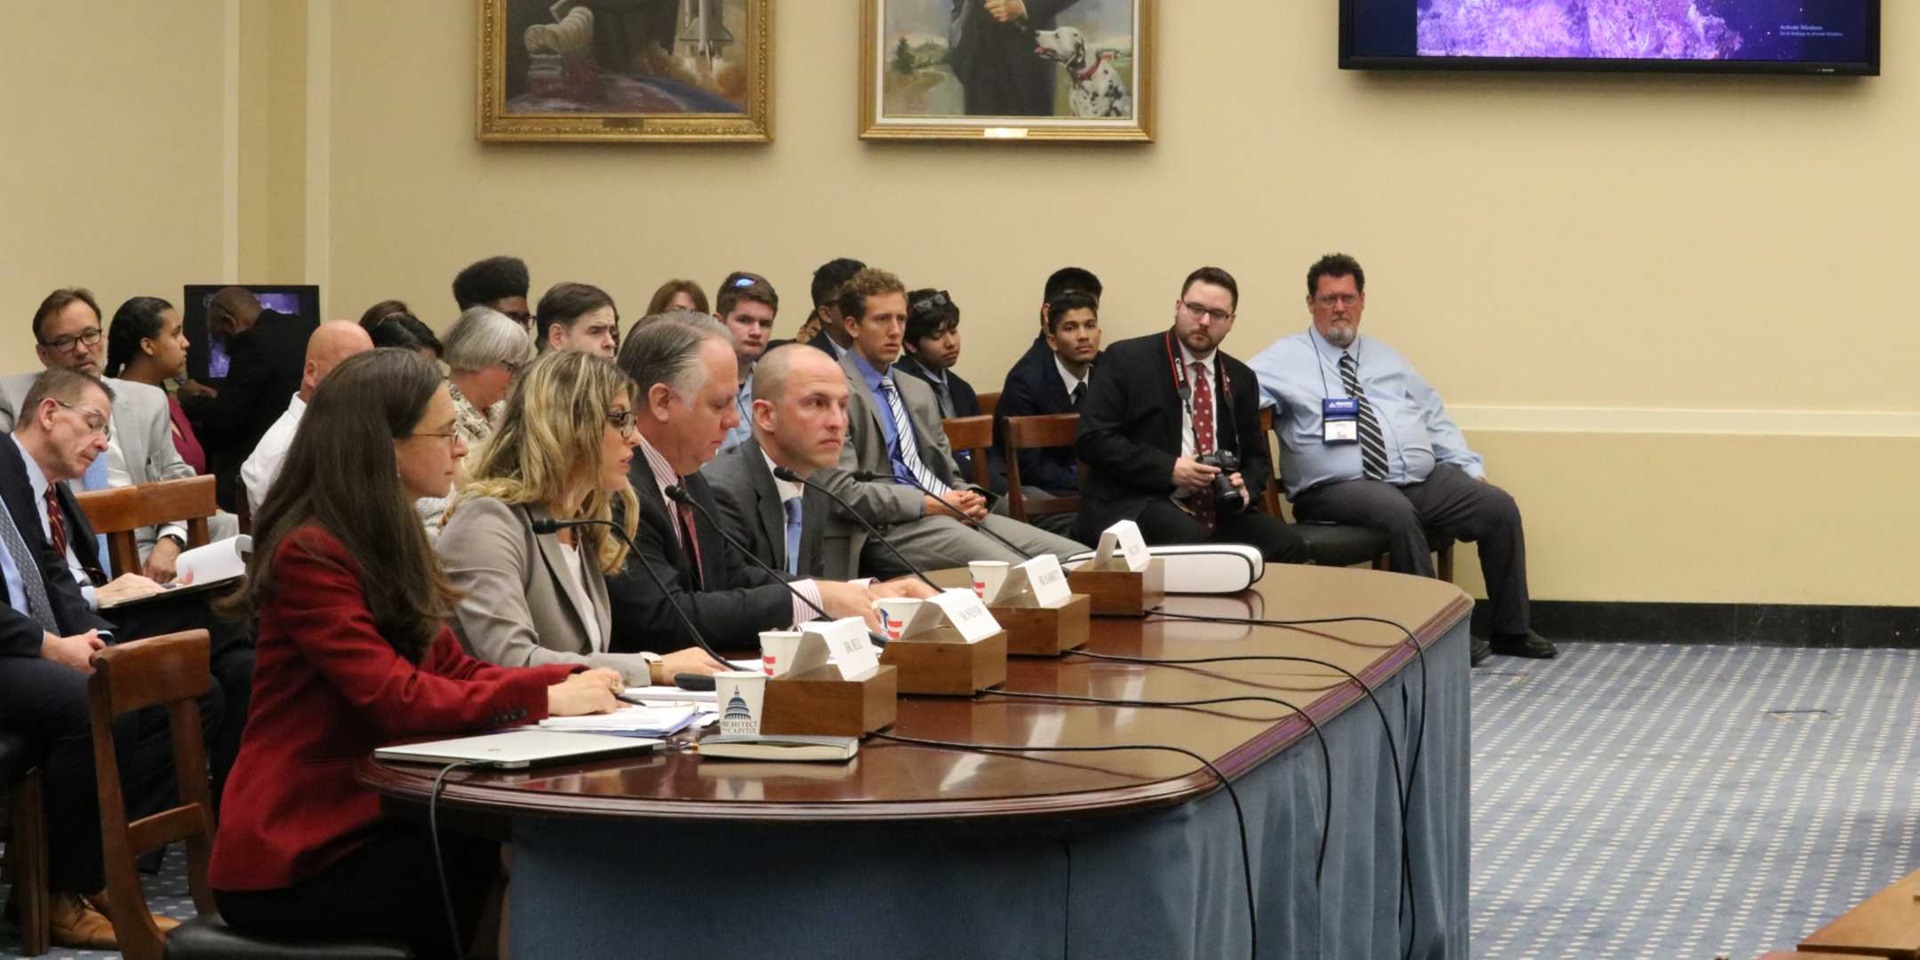 Dr Carlie Wiener (second from left) speaking at the House Committee Hearing. Image courtesy Catherine Anderson